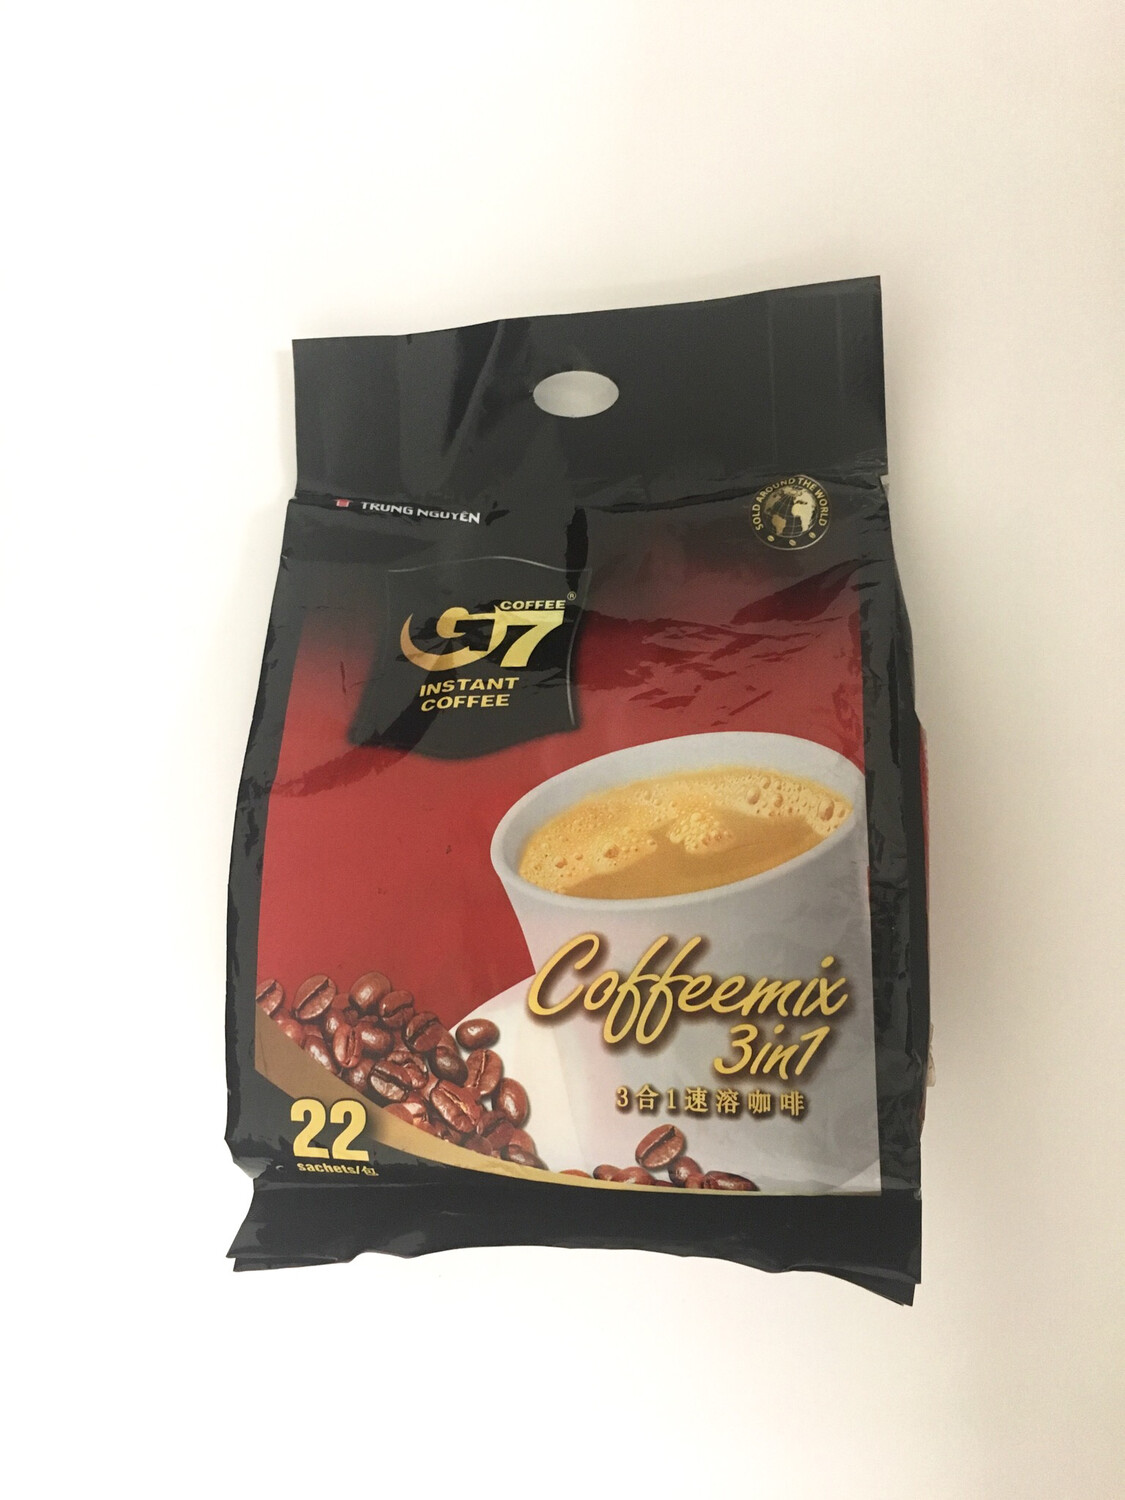 TRUNG NGUYEN G7 3IN1 COFFEE 22 BAGS 24X352G